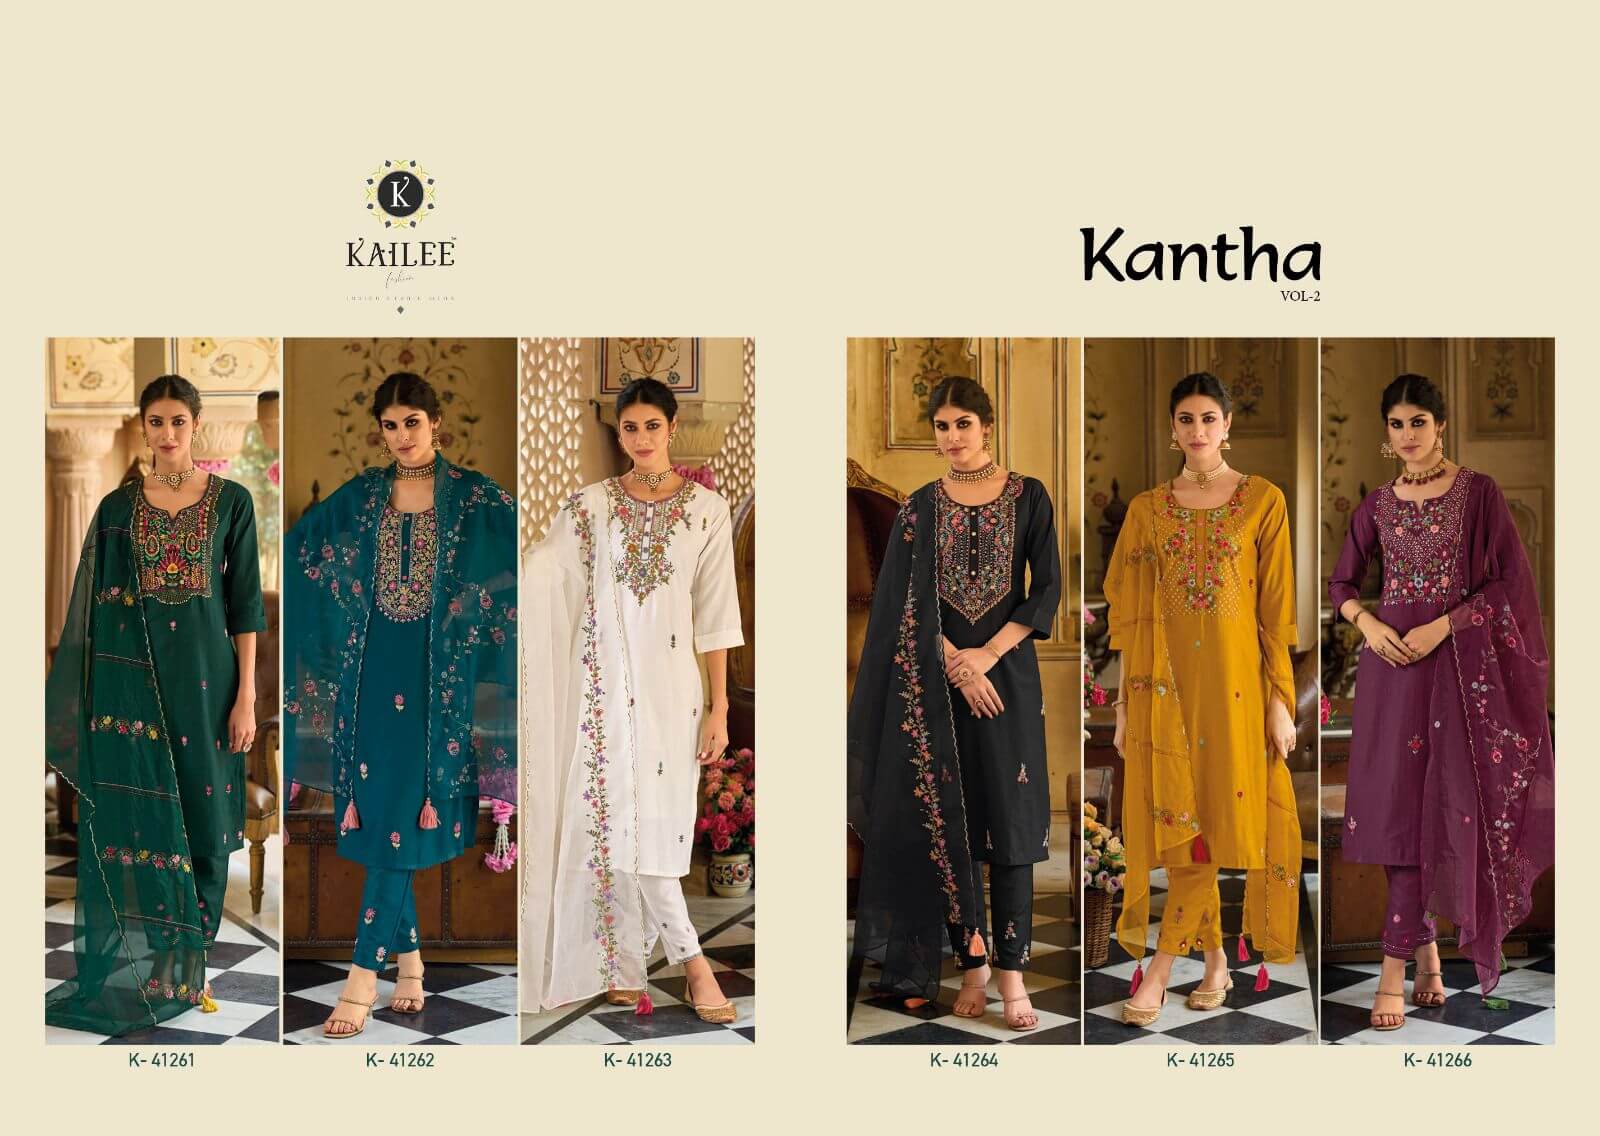 Kailee Kantha Vol 2 collection 1